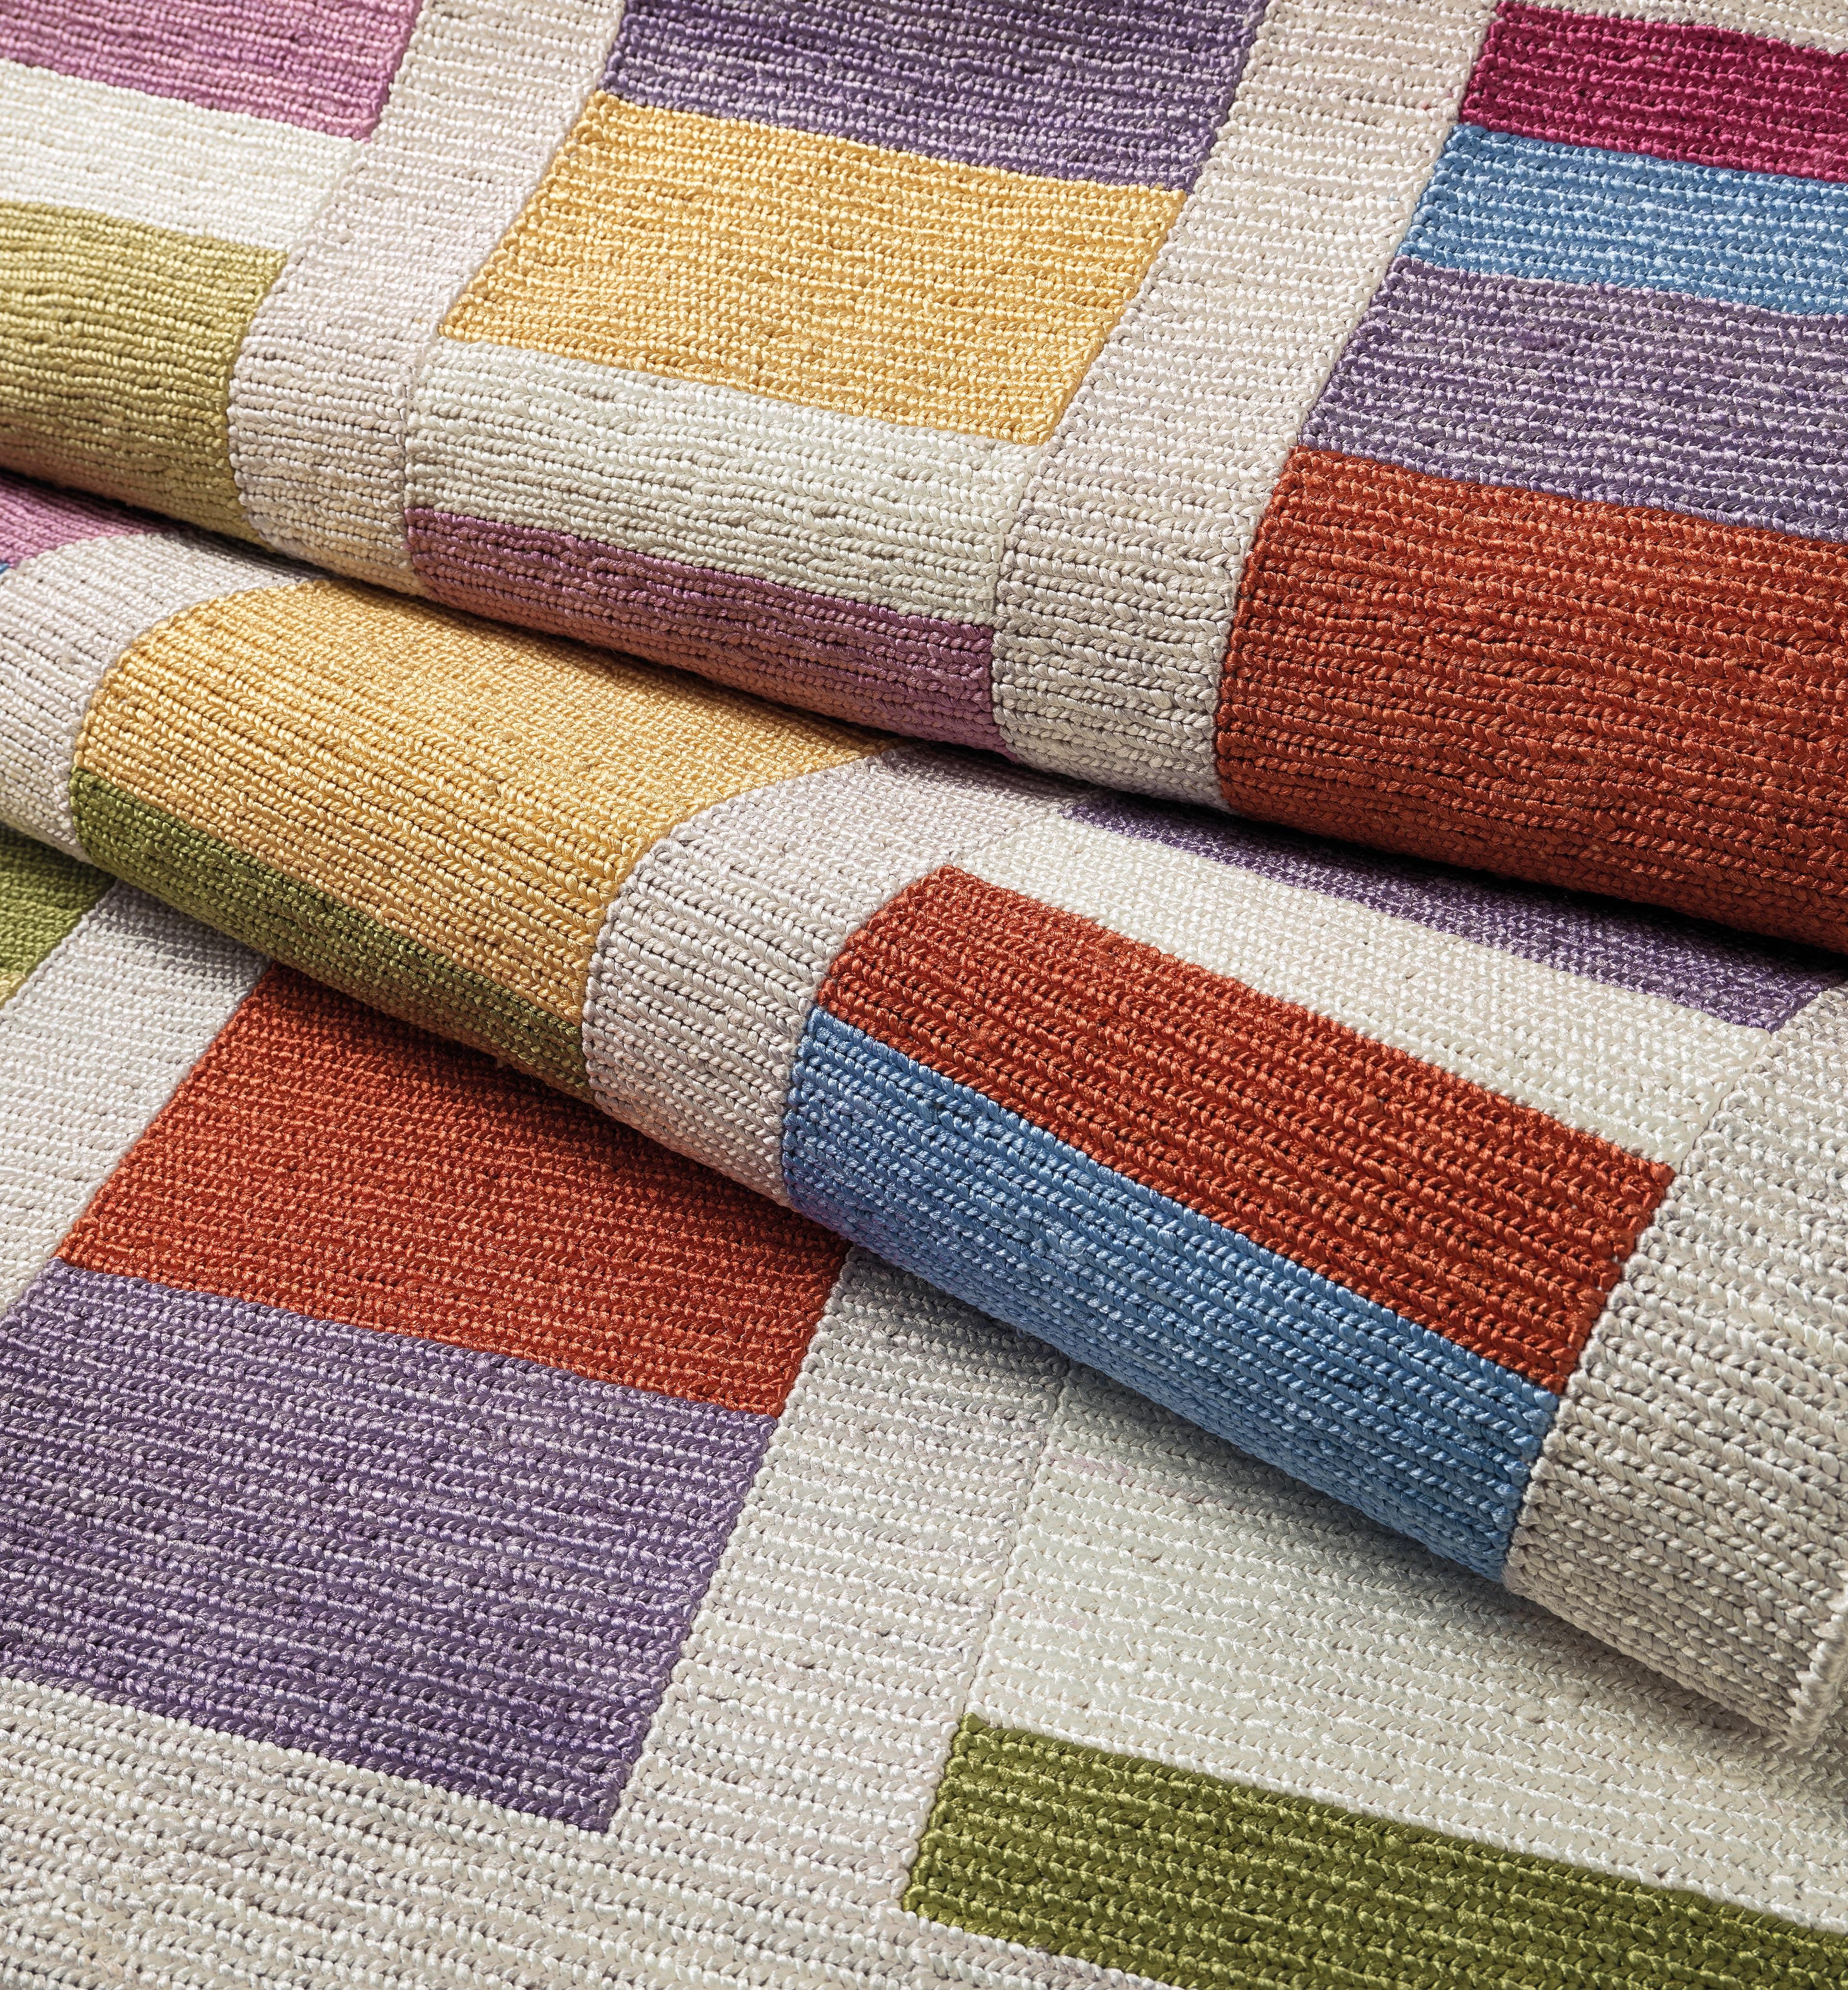 Missoni Home's outdoor, multi-colored, geometric rug with neutral ground; made to withstand outdoor elements
 